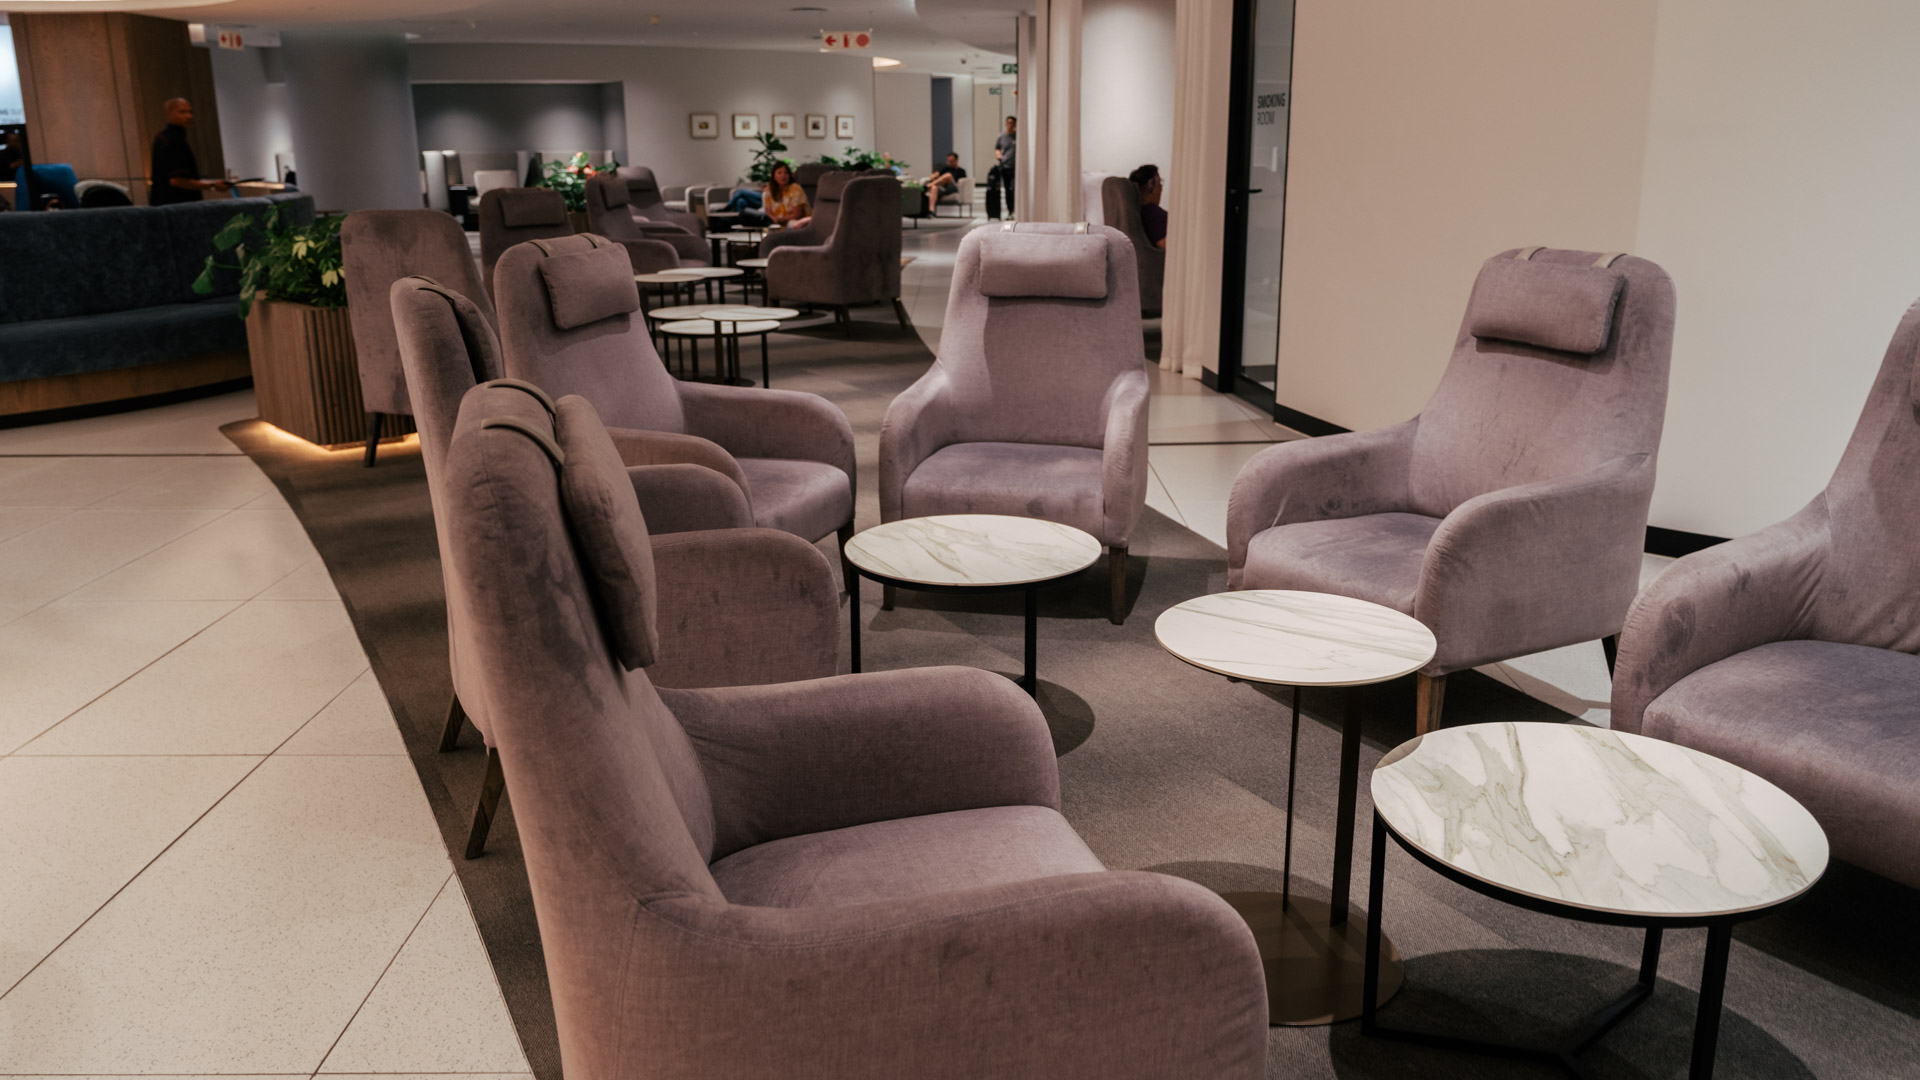 South African Airways Johannesburg Lounge social seats